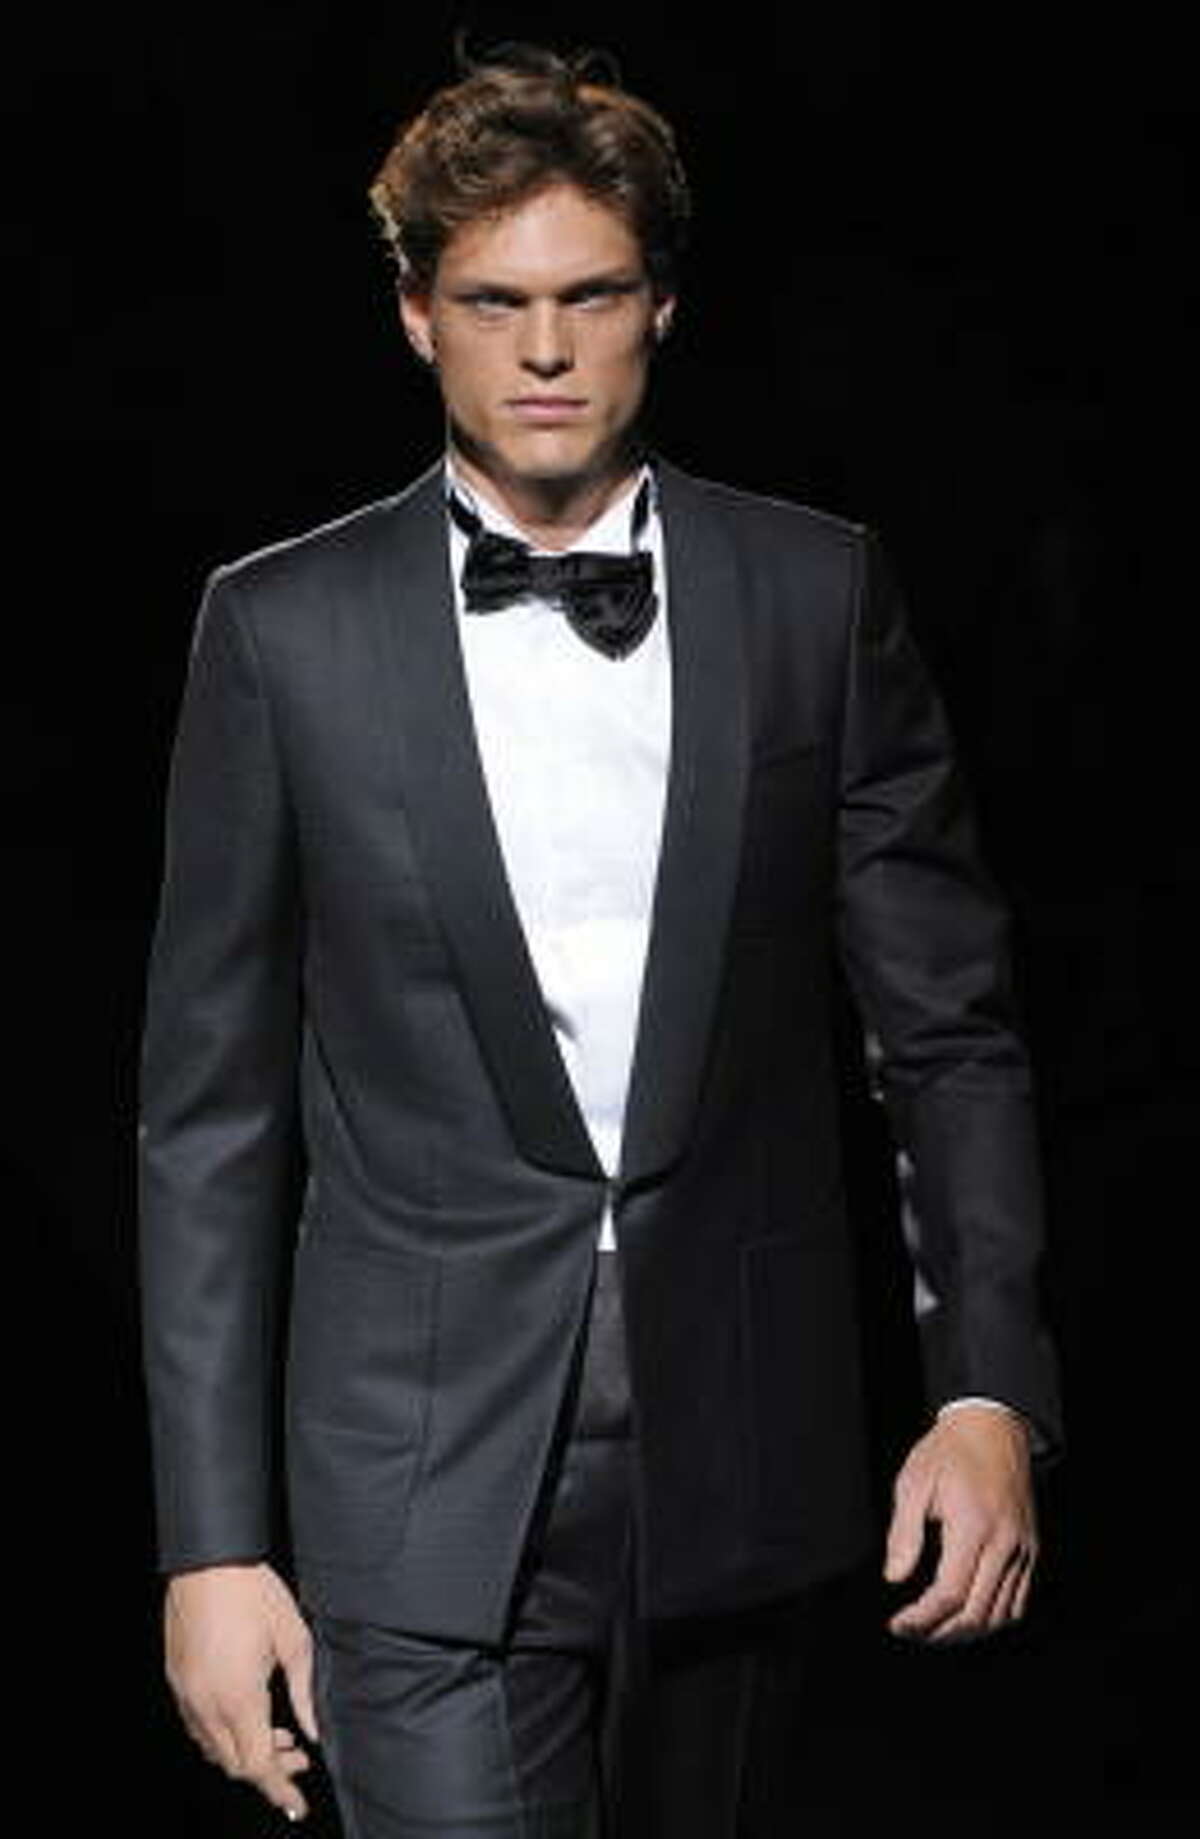 Black tie optional implies that you can choose between a tuxedo or a suit, but it really means a tux.